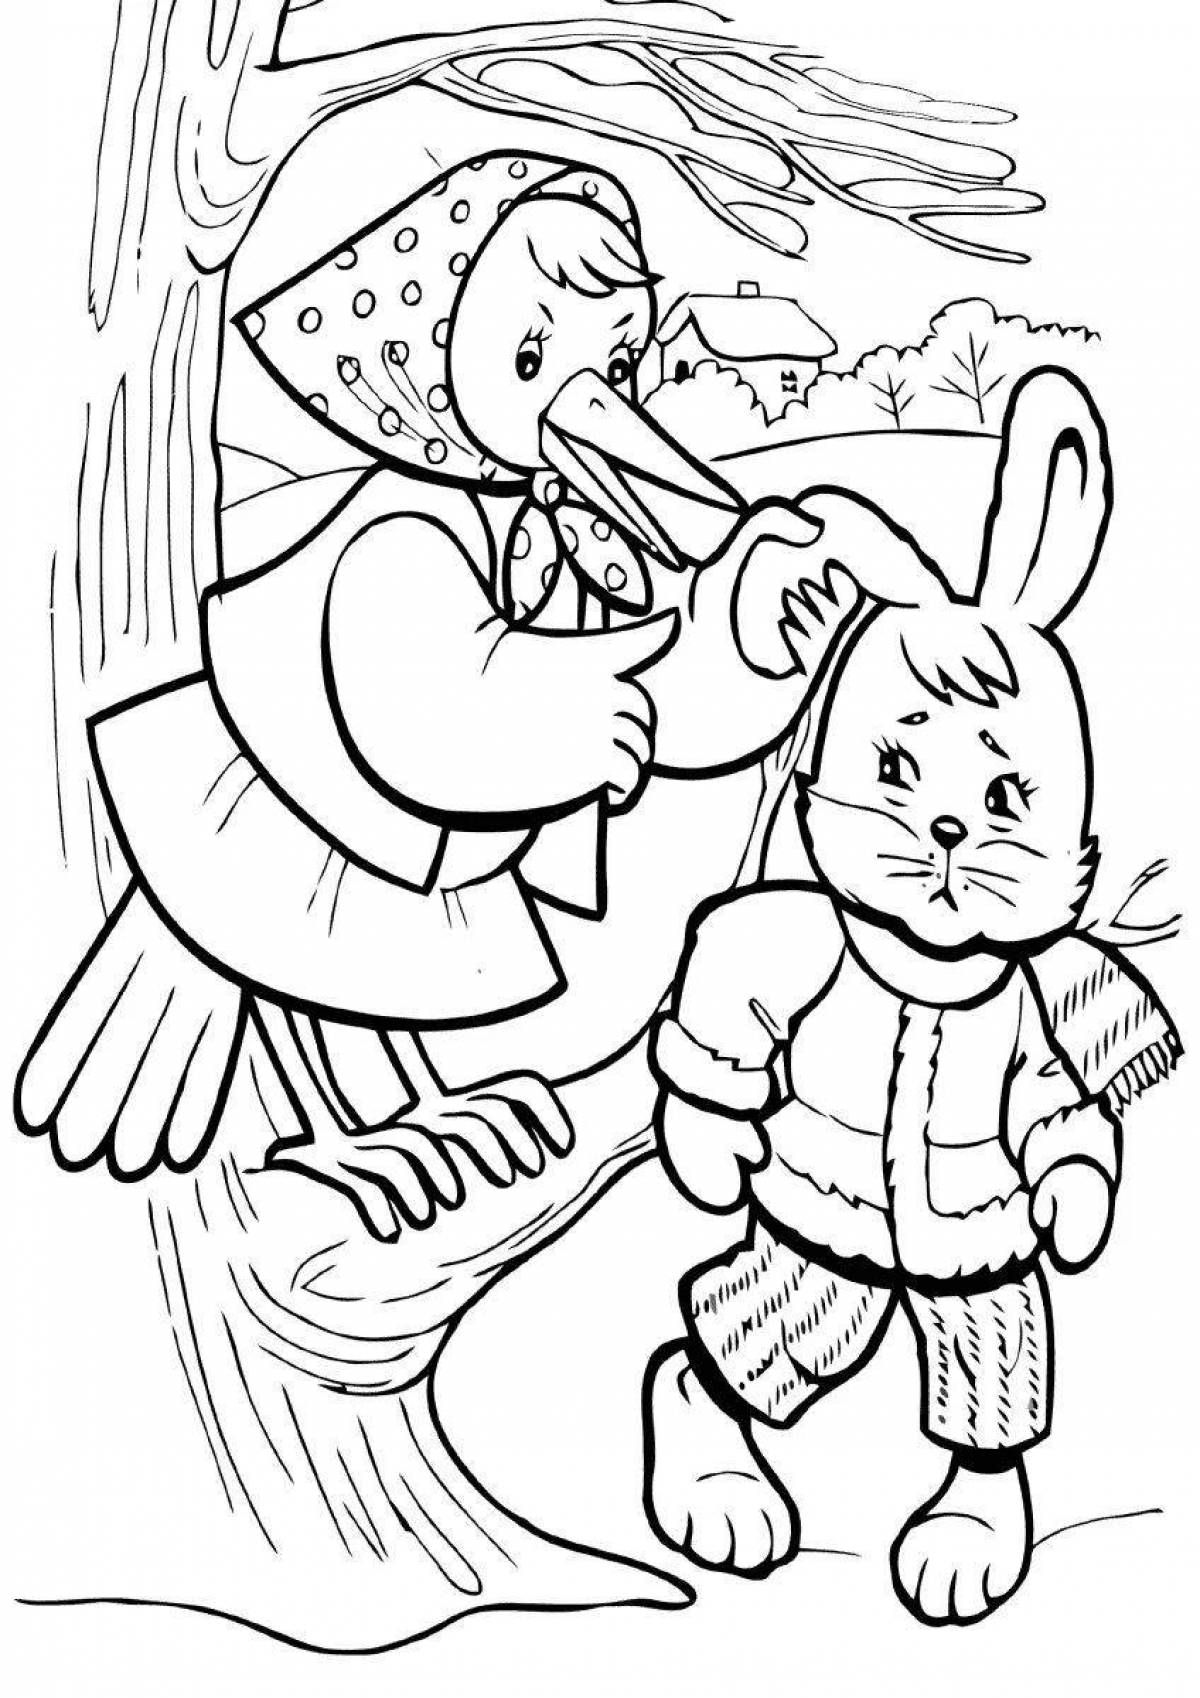 Entertaining coloring book heroes of Russian fairy tales